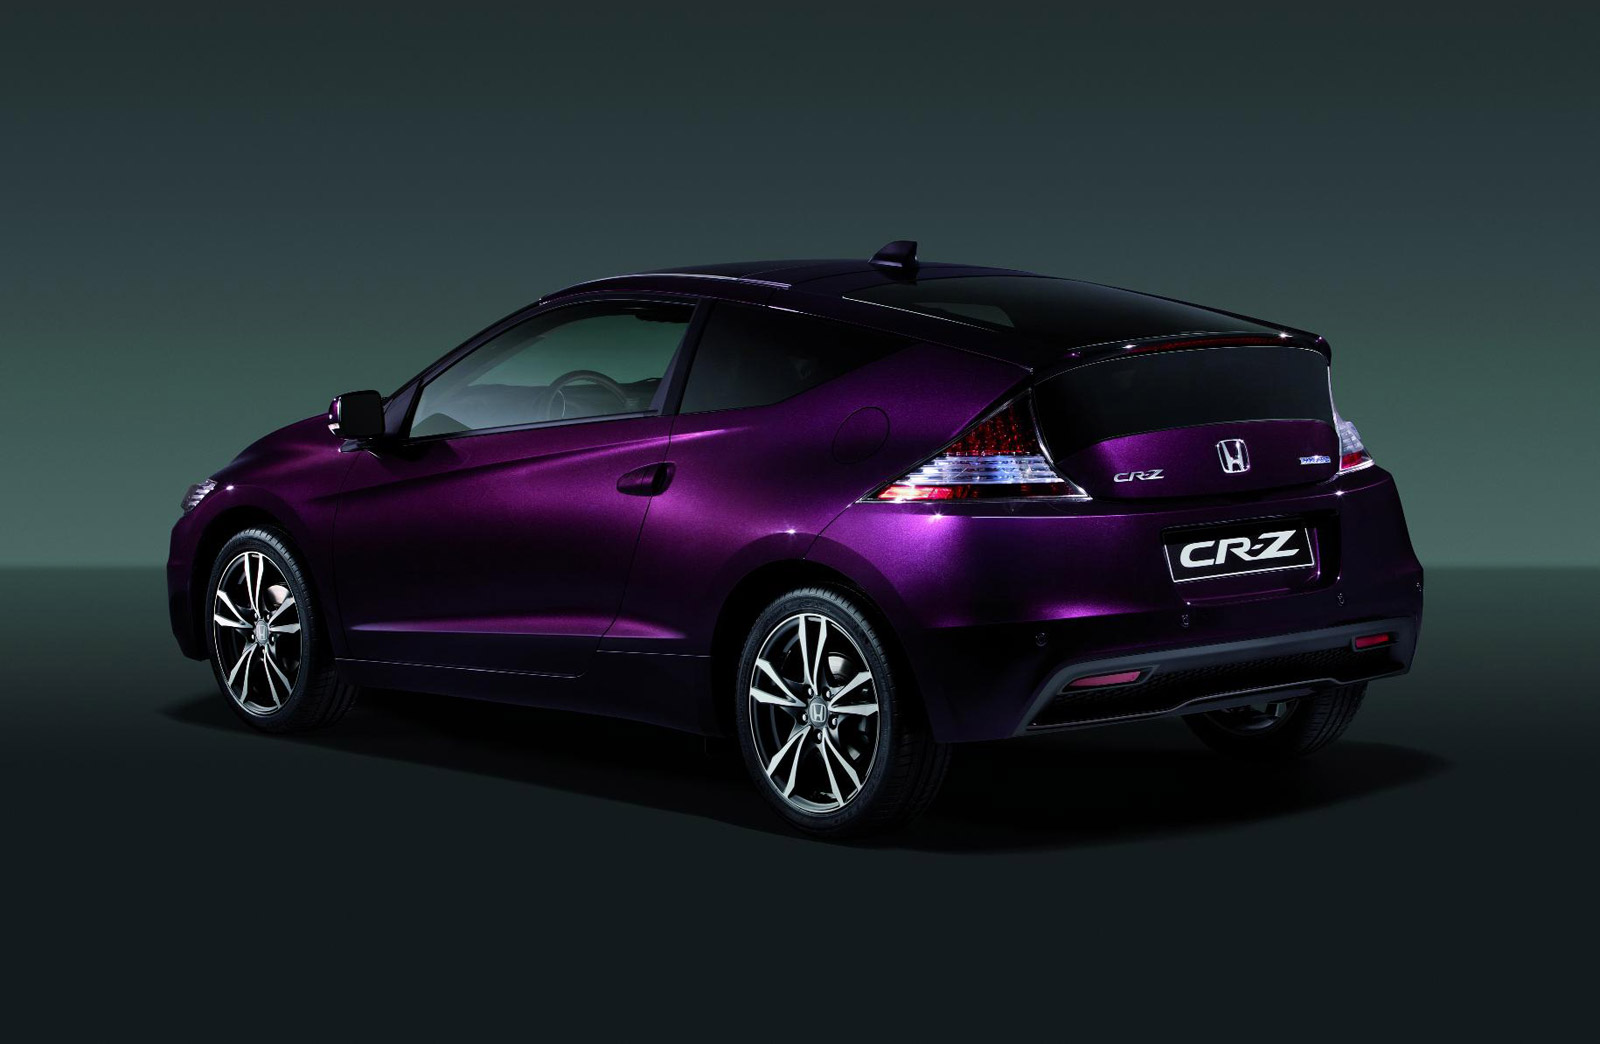 2013 Honda Civic & CR-Z: Revisions And Pricing Summary